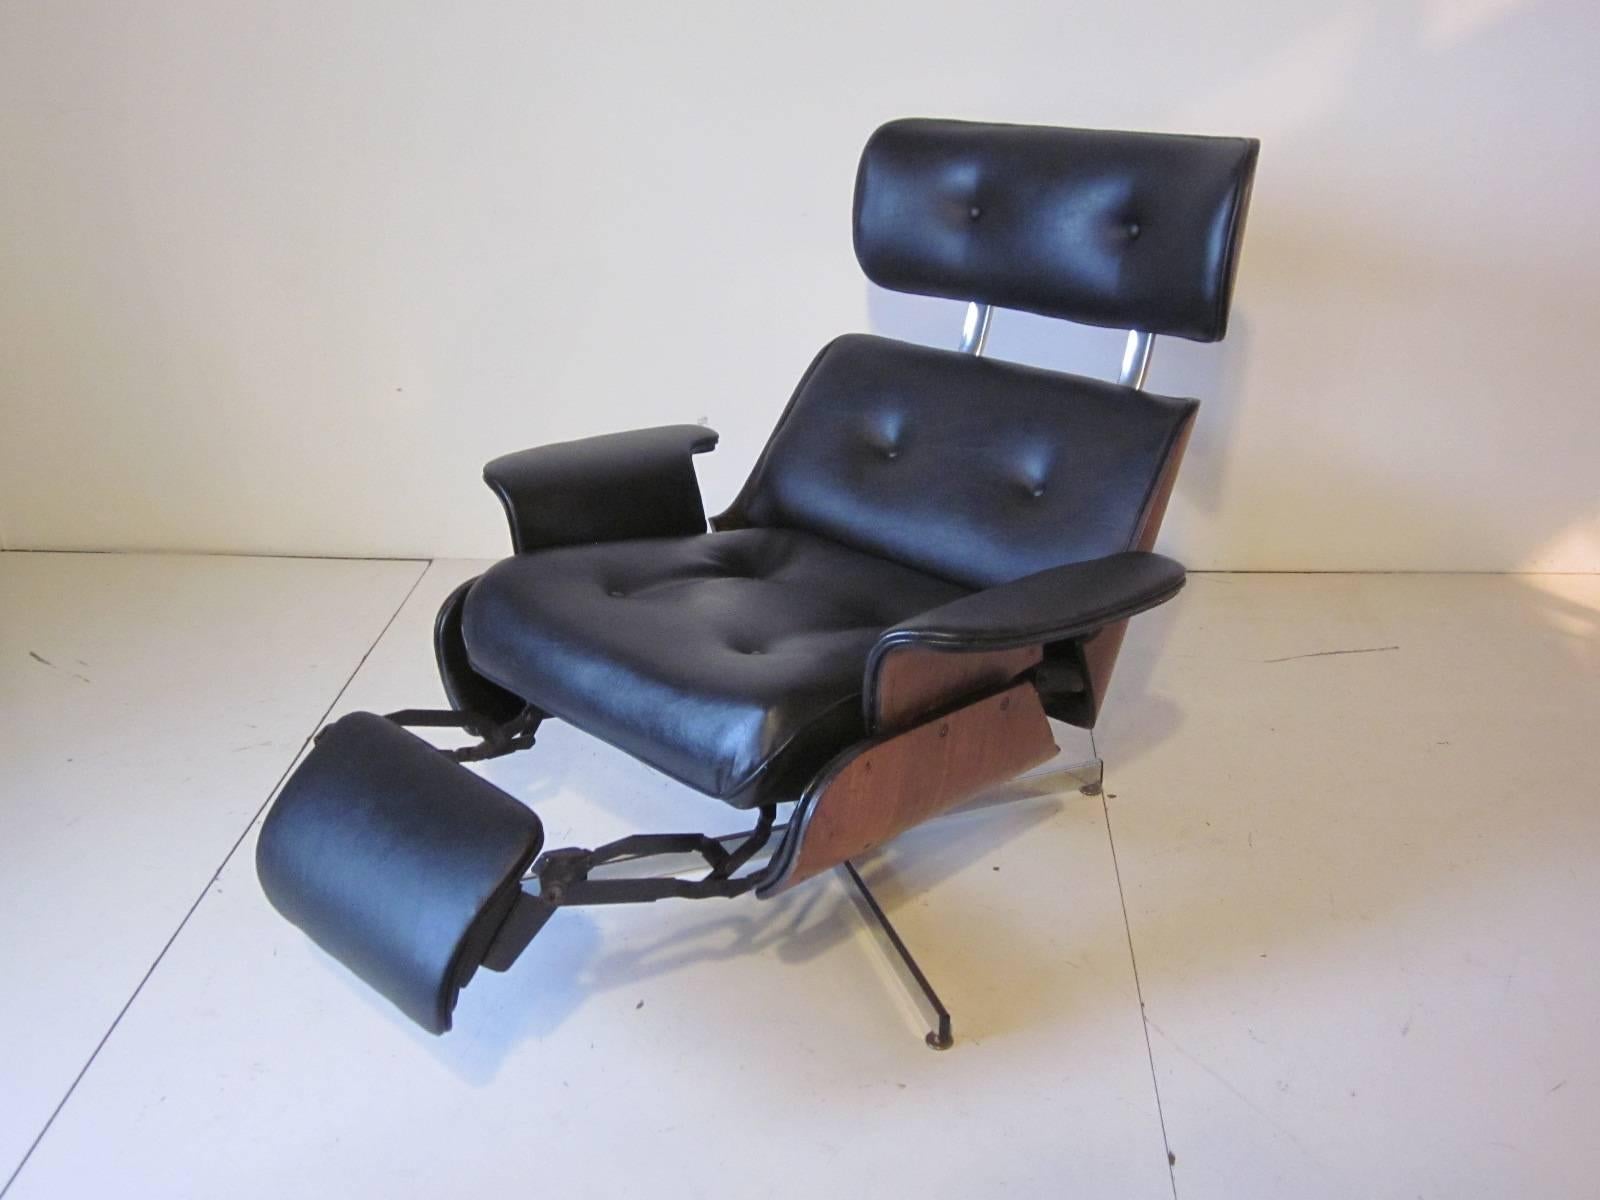 A Ply Craft bent walnut plywood lounge chair in black leatherette with a built in foot rest in the style of lazy boy, chrome X base and large flared arms. The chair swivels and extends in three modes, lounge chair, tilting back with foot rest